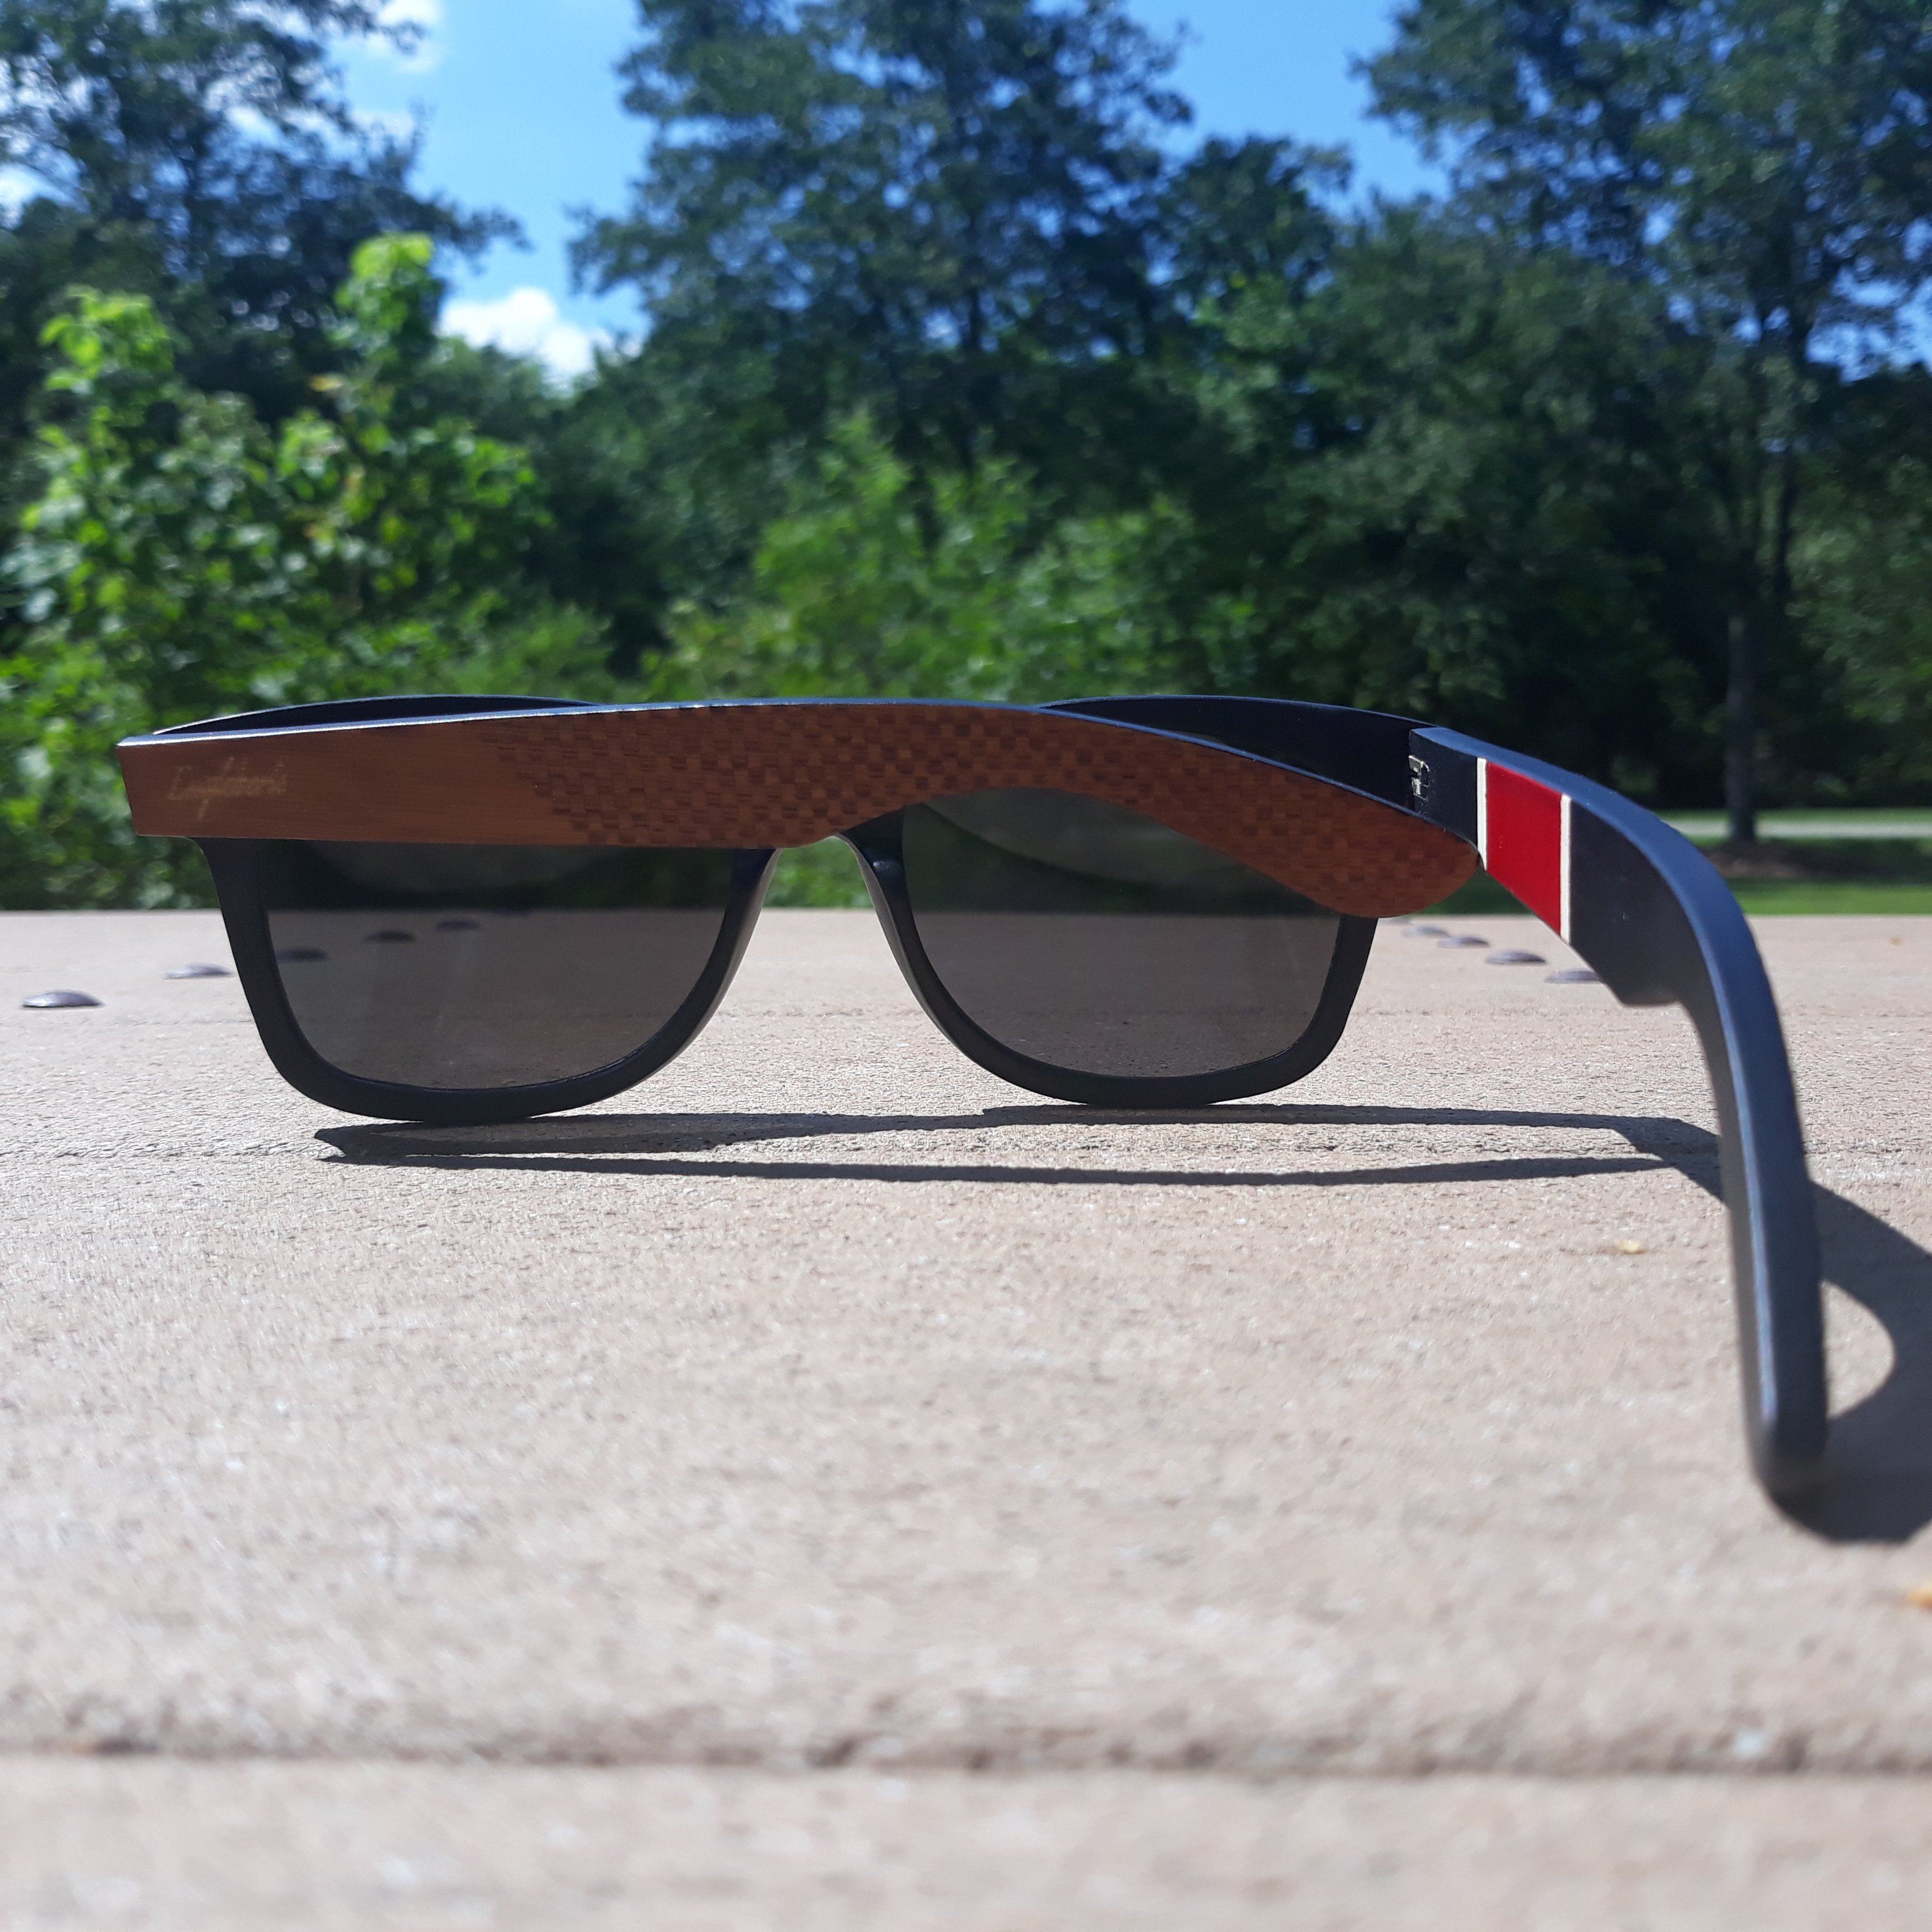 Red Stripe Two Tone Sunglasses Engraved and Polarized With Case Sunglasses 